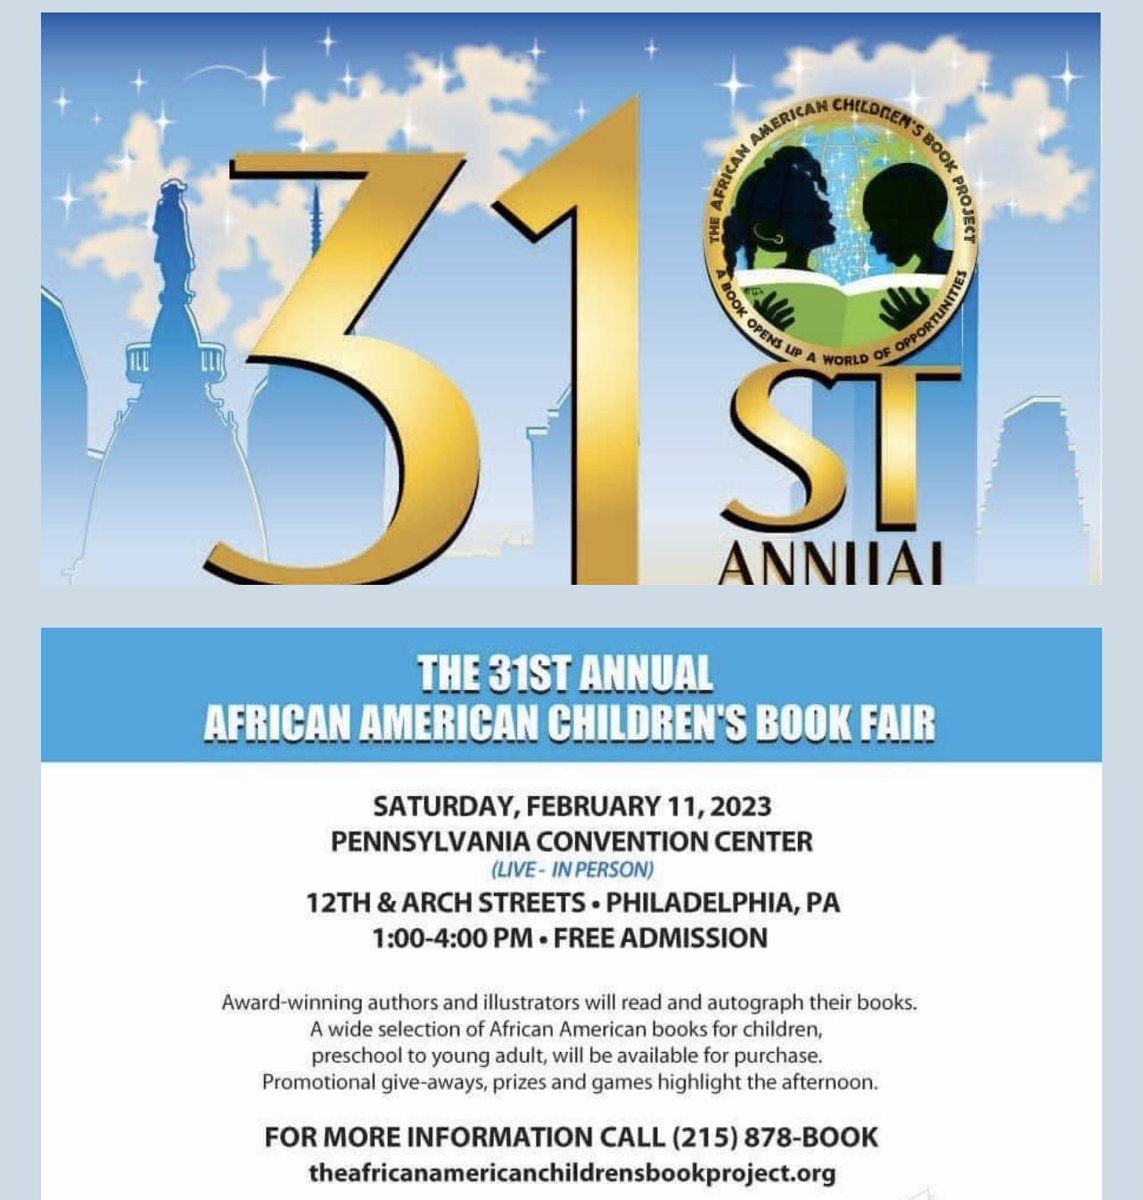 Save This Date!  You don’t want to miss The African American Children’s Book Fair in Philly!  See you there! 2/11/2023  #wewerethefire #whoisketanjibrownjackson #whoisstaceyabrams